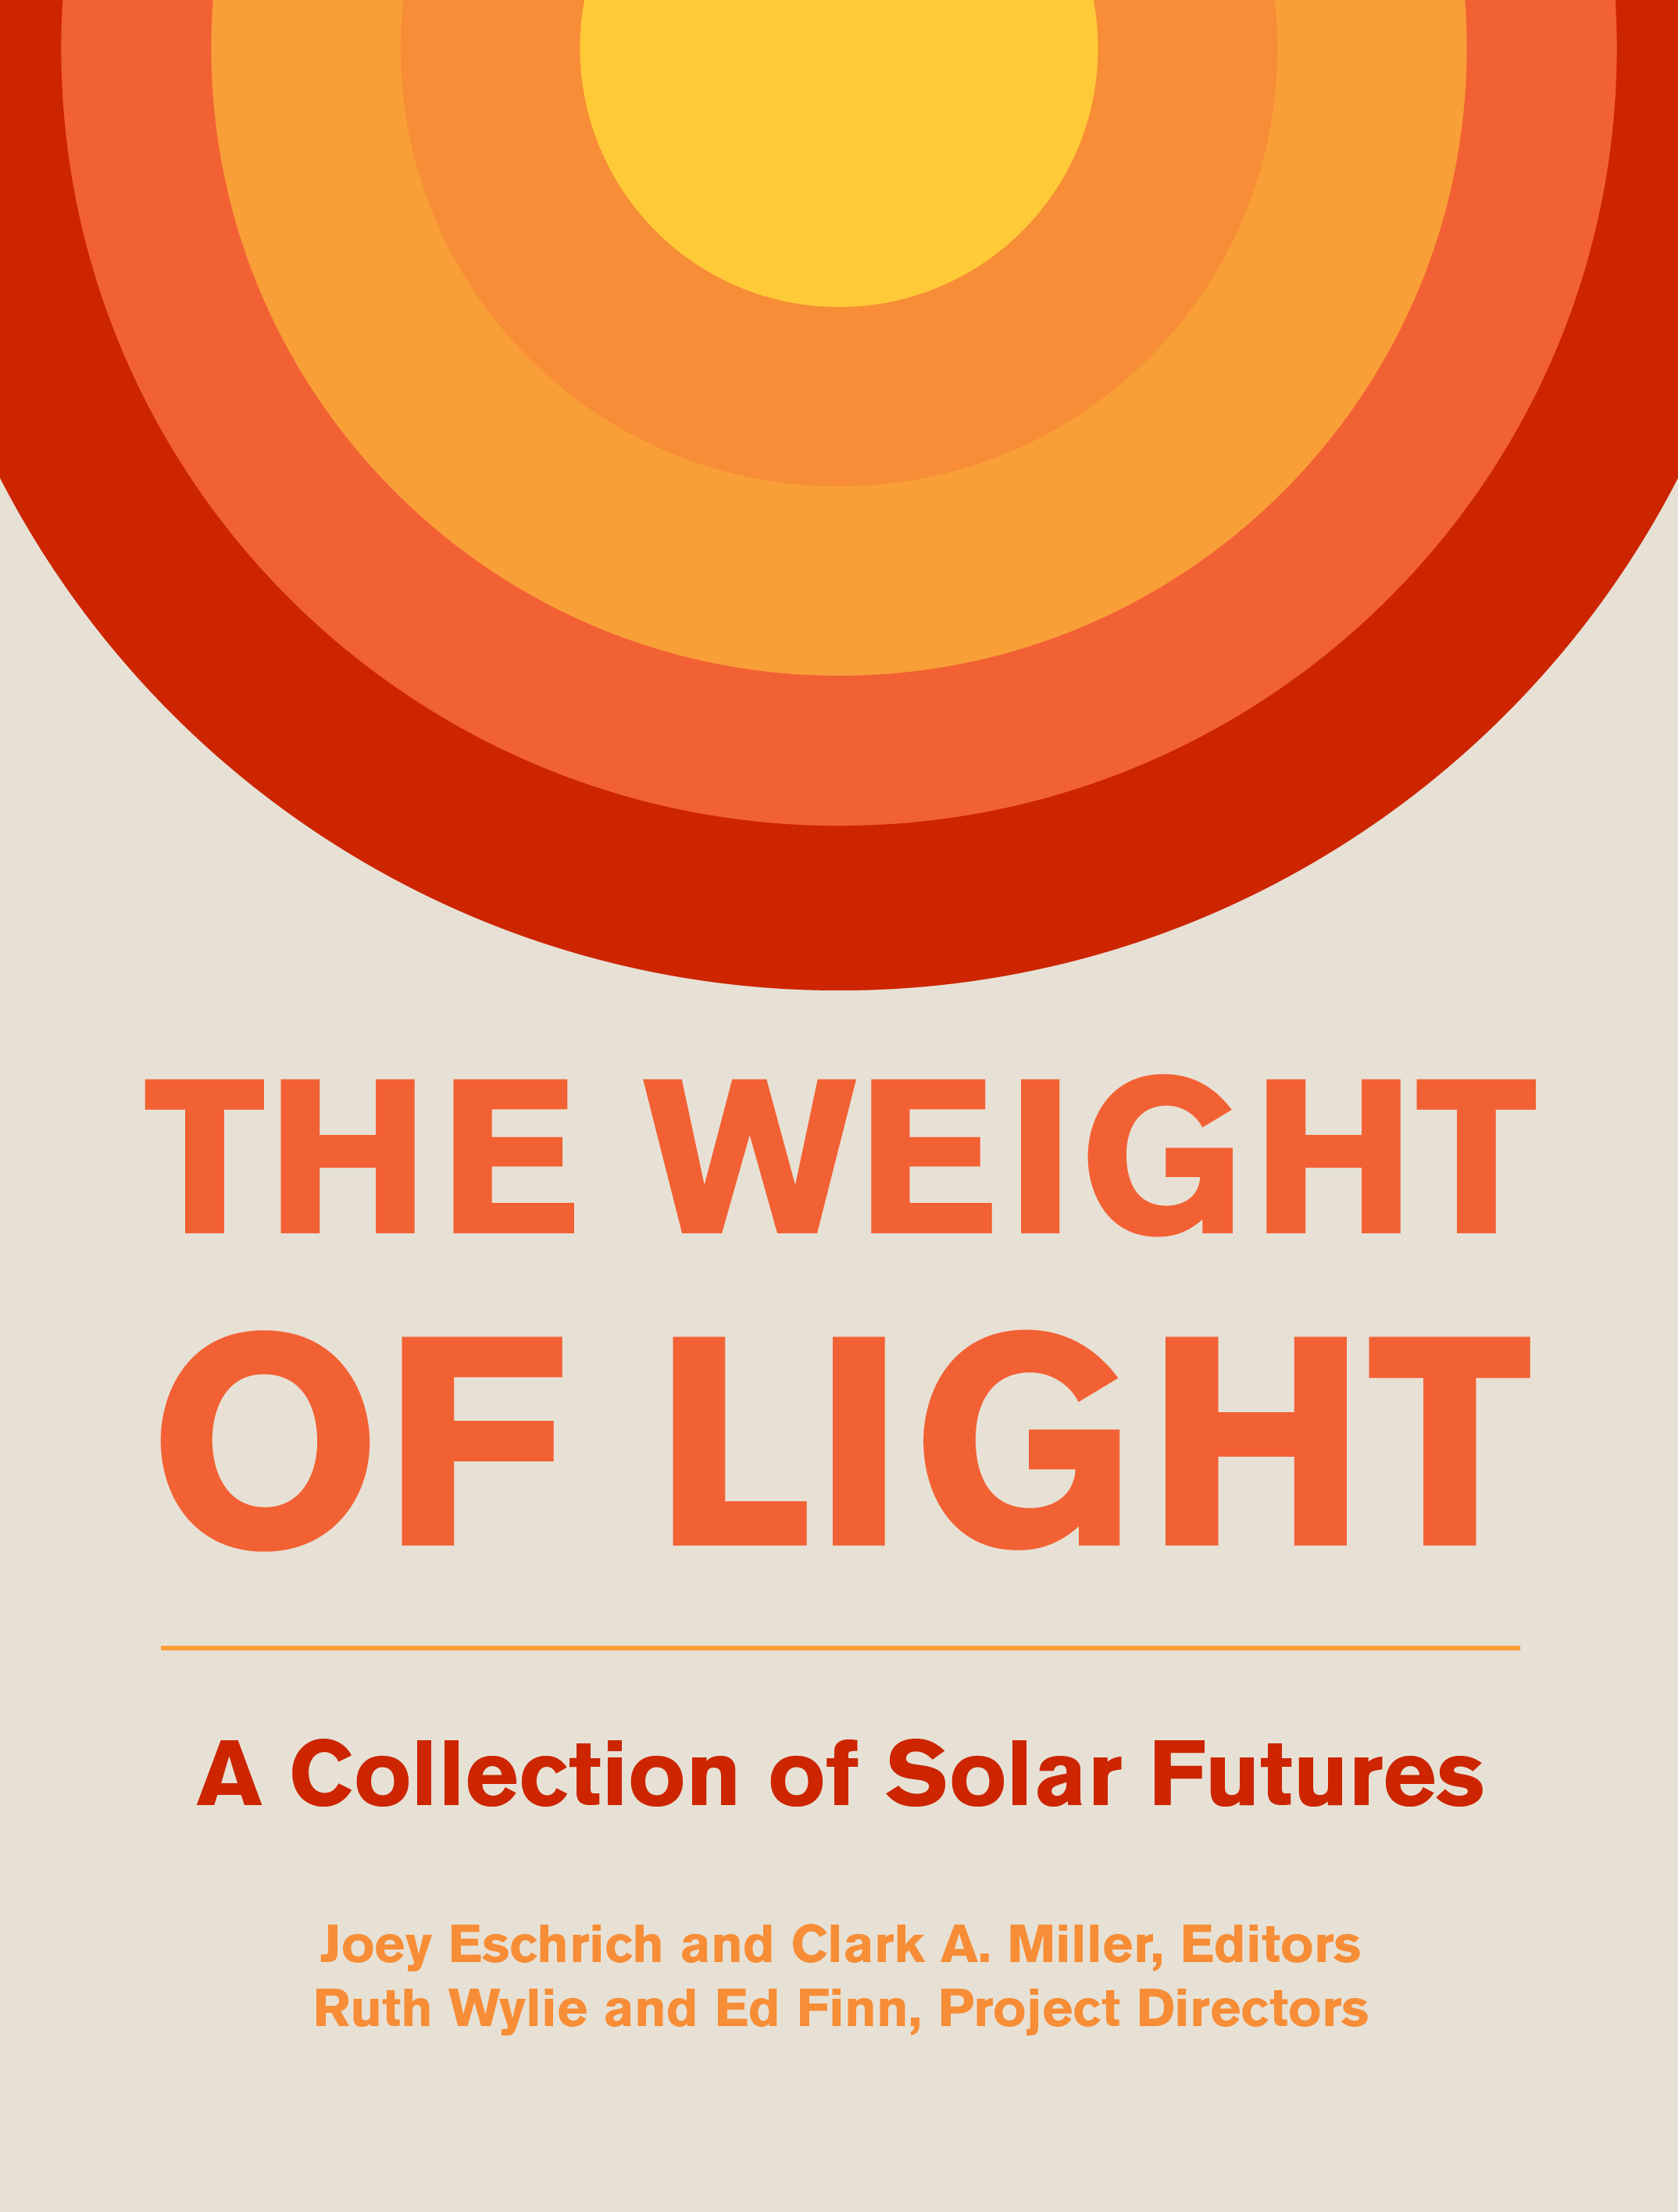 Brenda Cooper: The Weight of Light (Center for Science and the Imagination, Arizona State University)